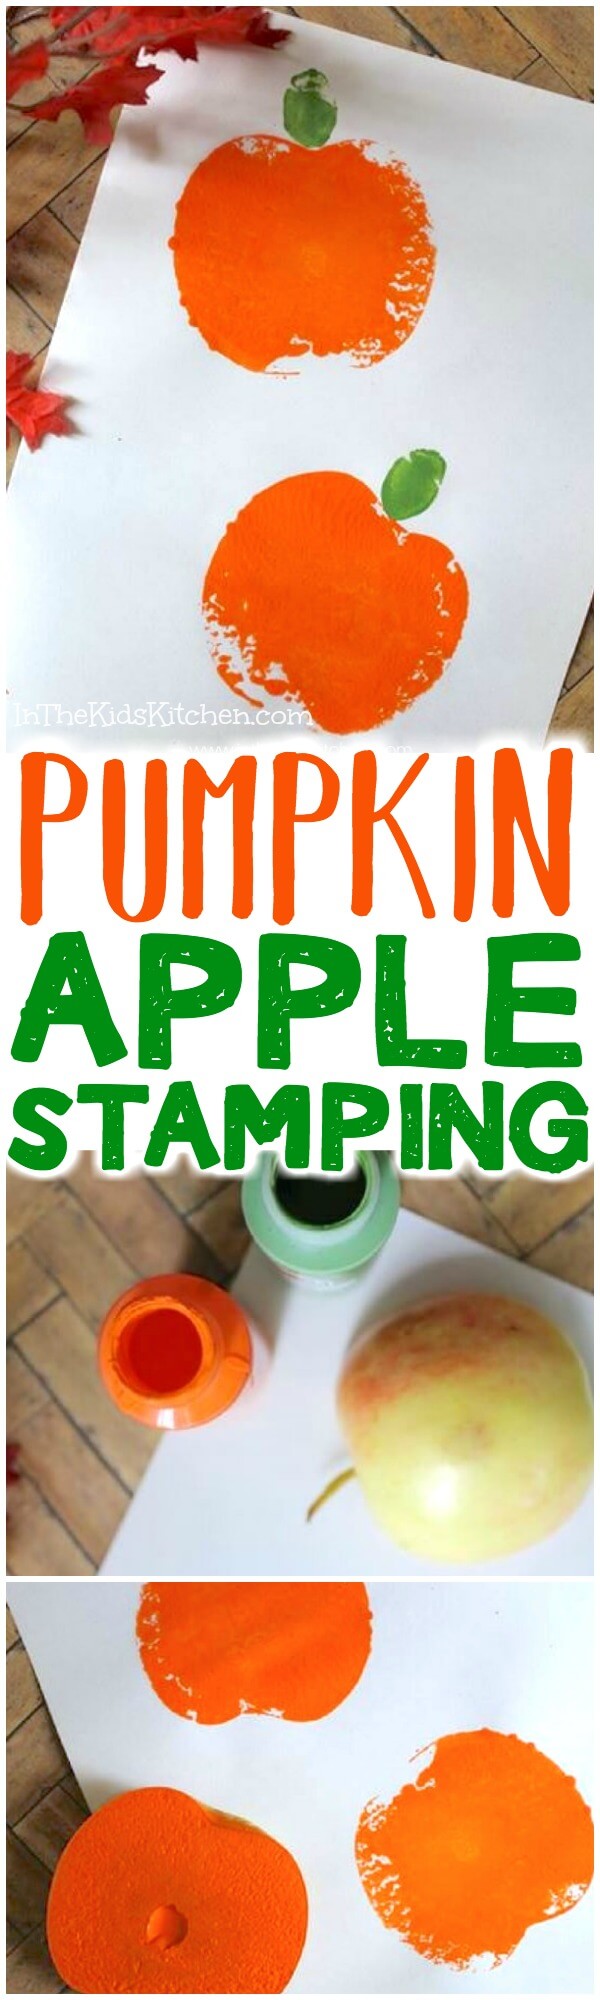 Who would have thought you could make pumpkins using apples? This adorable pumpkin apple stamping craft is perfect for holiday kids art & decorations.